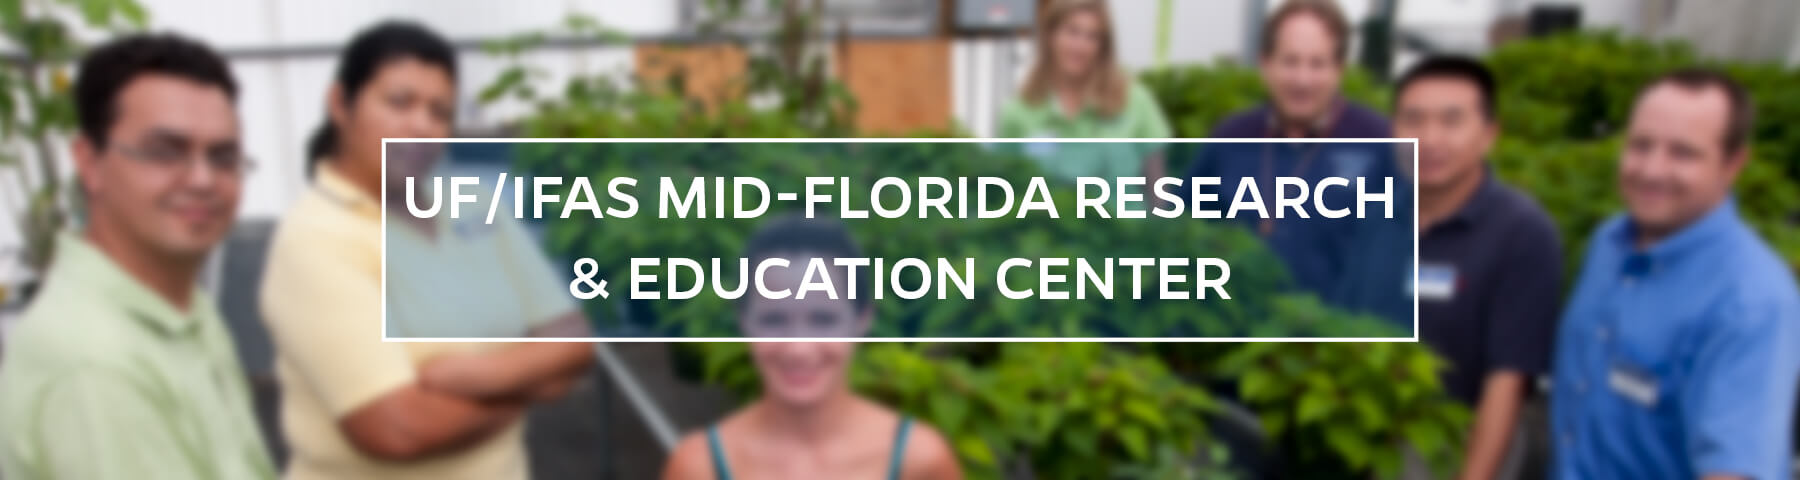 Mid-Florida Research and Education Center Header